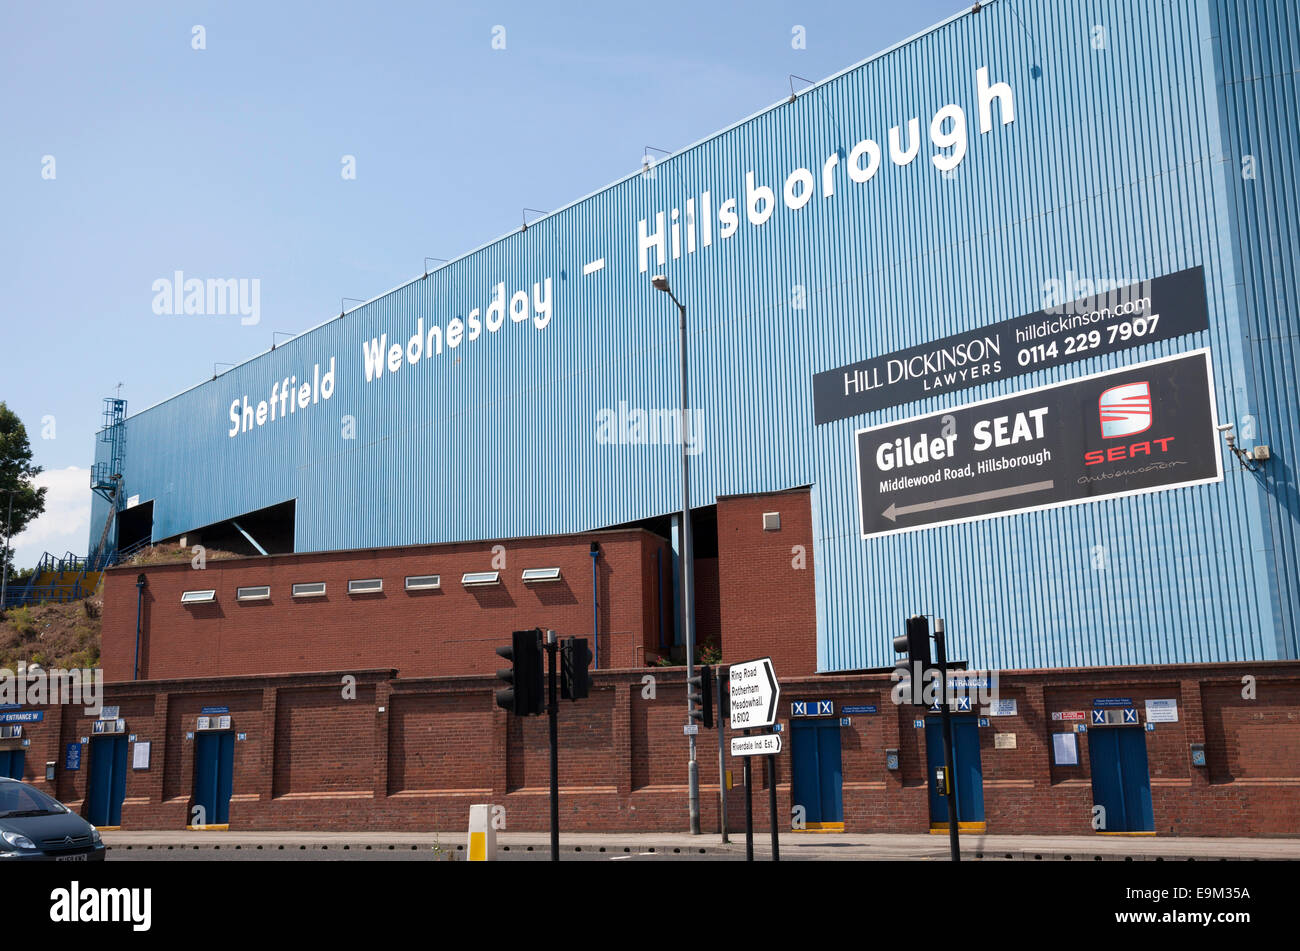 Sheffield Wednesday Football Club, Hillsborough, Sheffield, South Yorkshire, Angleterre, Royaume-Uni Banque D'Images